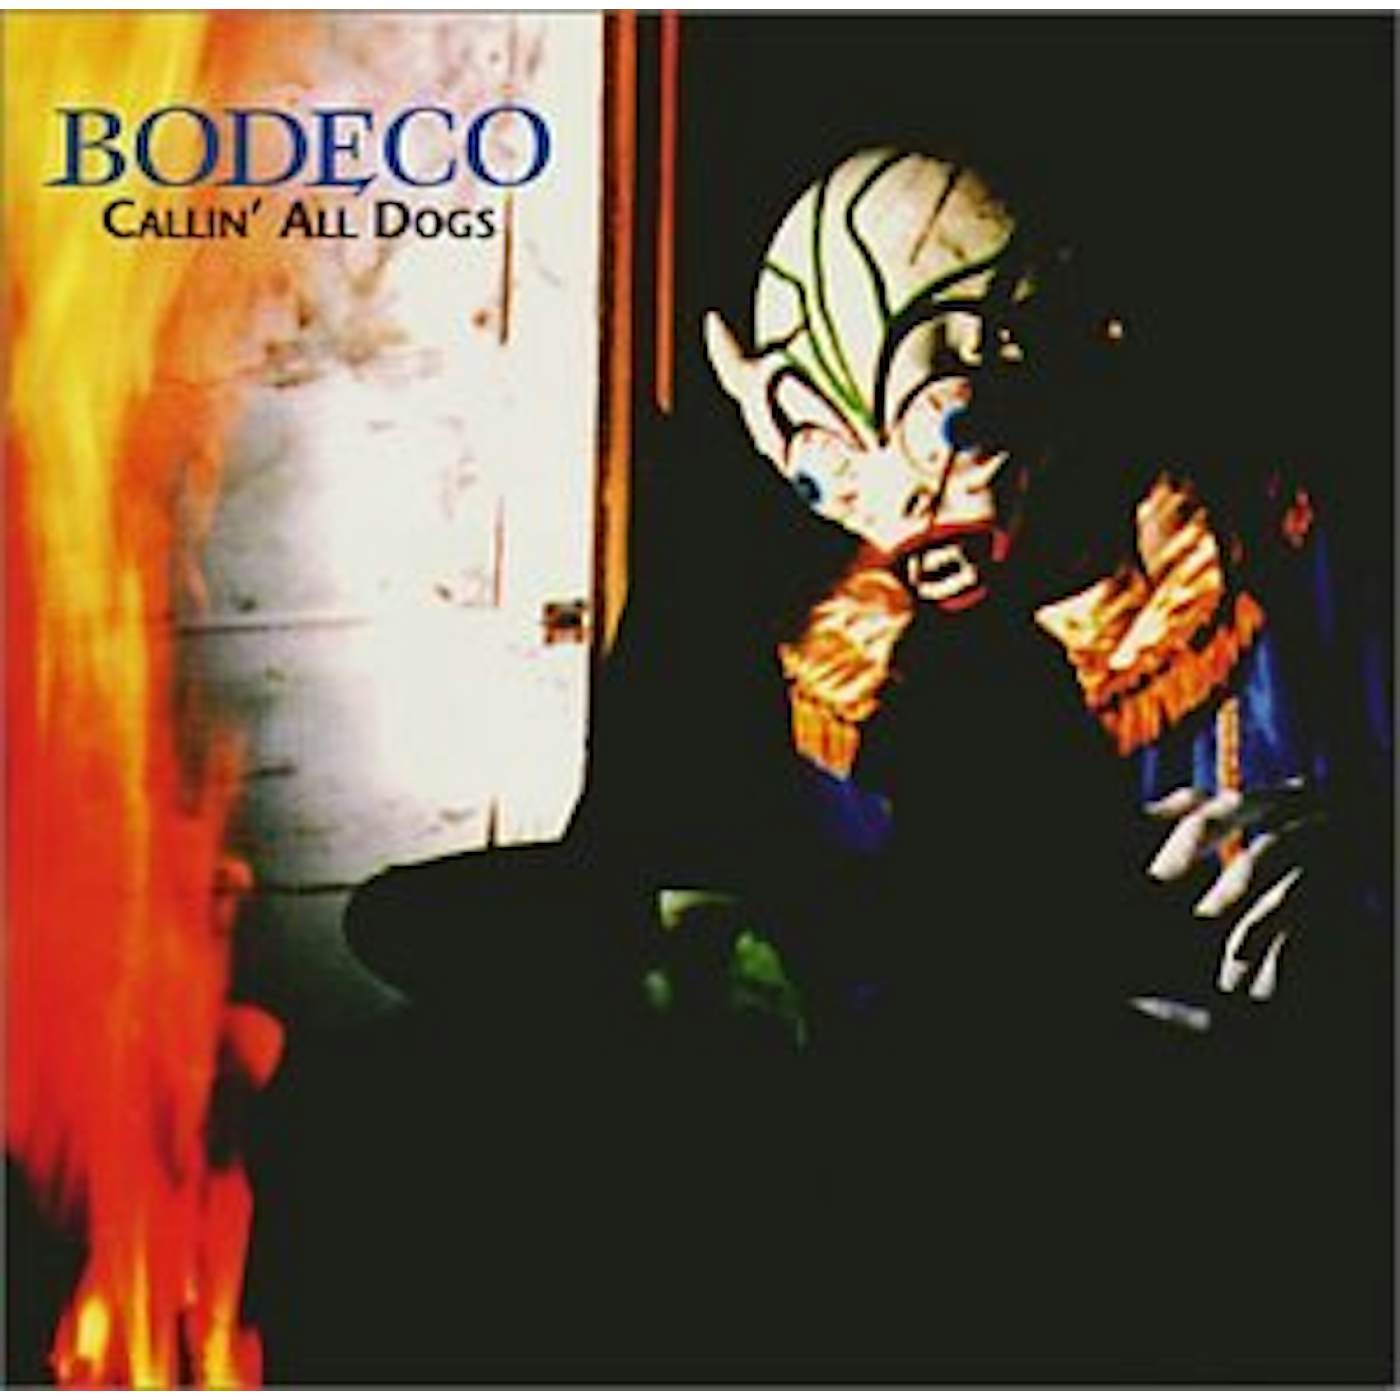 Bodeco CALLING ALL DOGS CD